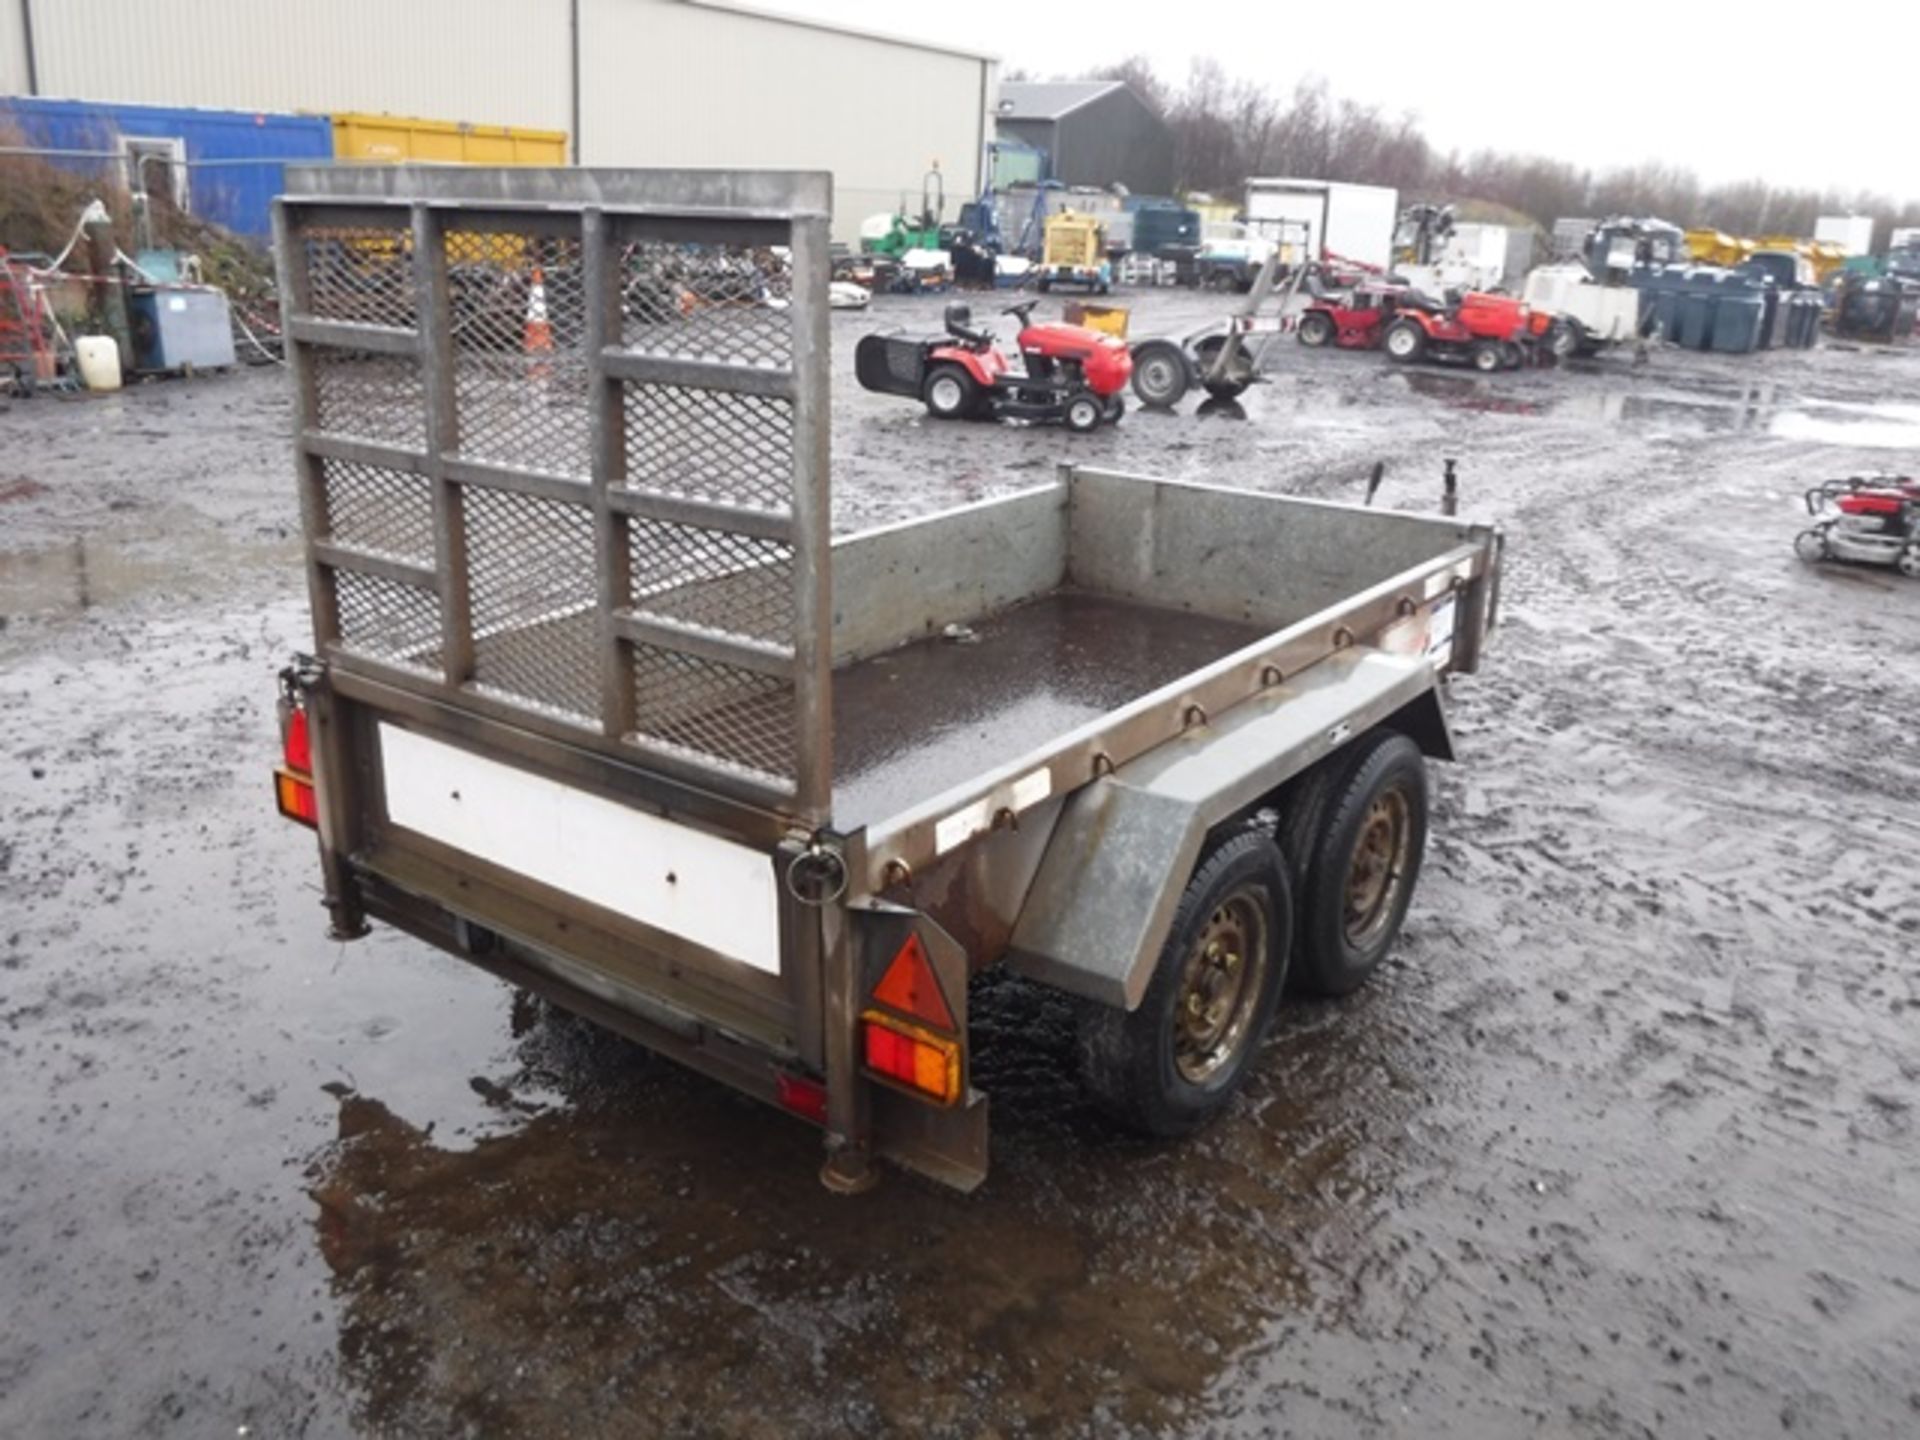 INDESPENSION CHALLANGER 8'X4' TWIN AXLE PLANT TRAILER C/W LOADING RAMP. SNG042949. ASSET NO. 758-939 - Image 2 of 5